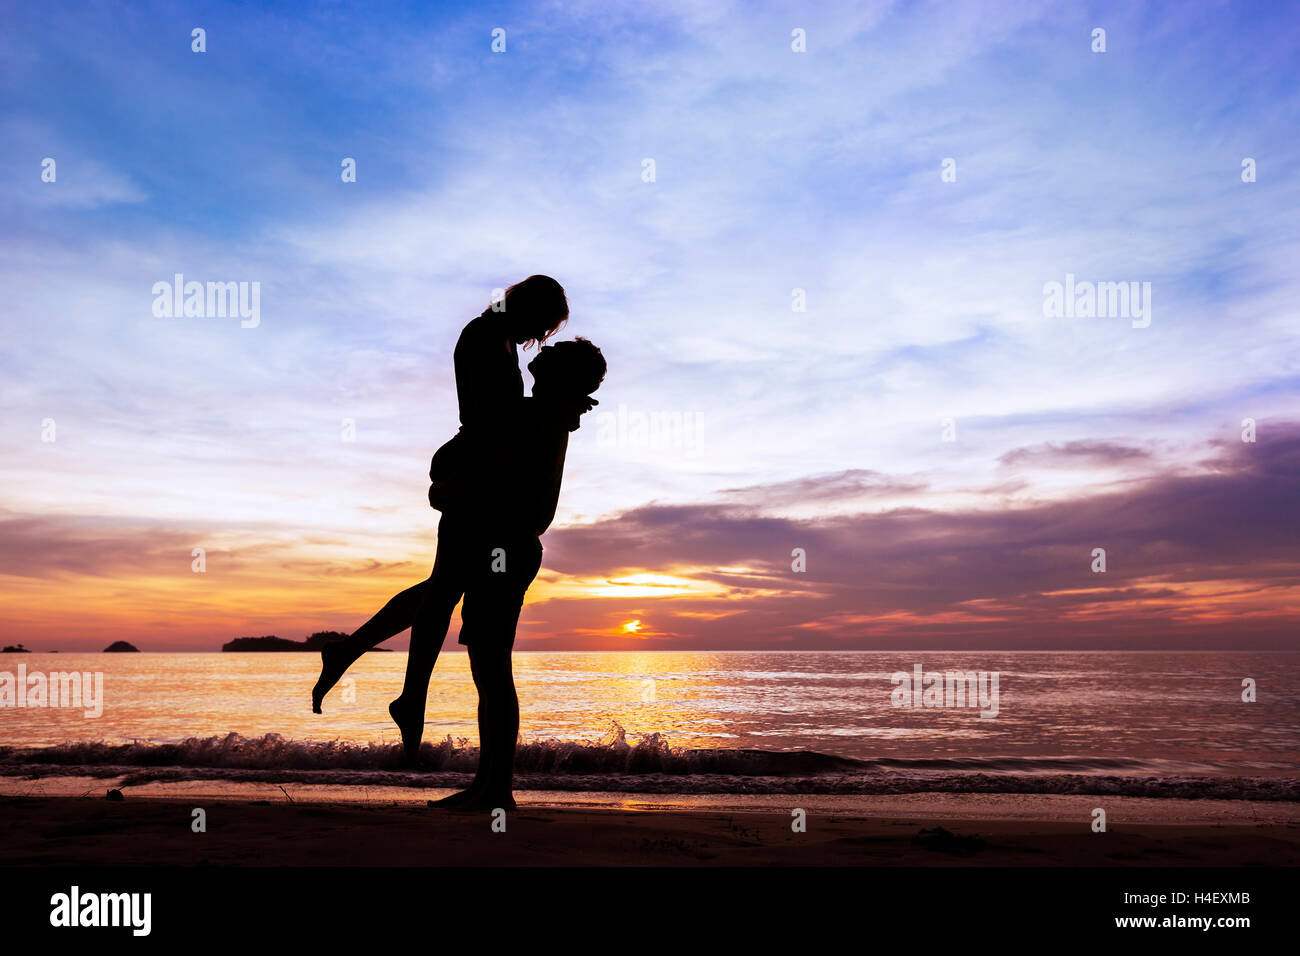 Silhouette of happy couple on paradise beach at sunset, man taking the girl in his arms Stock Photo